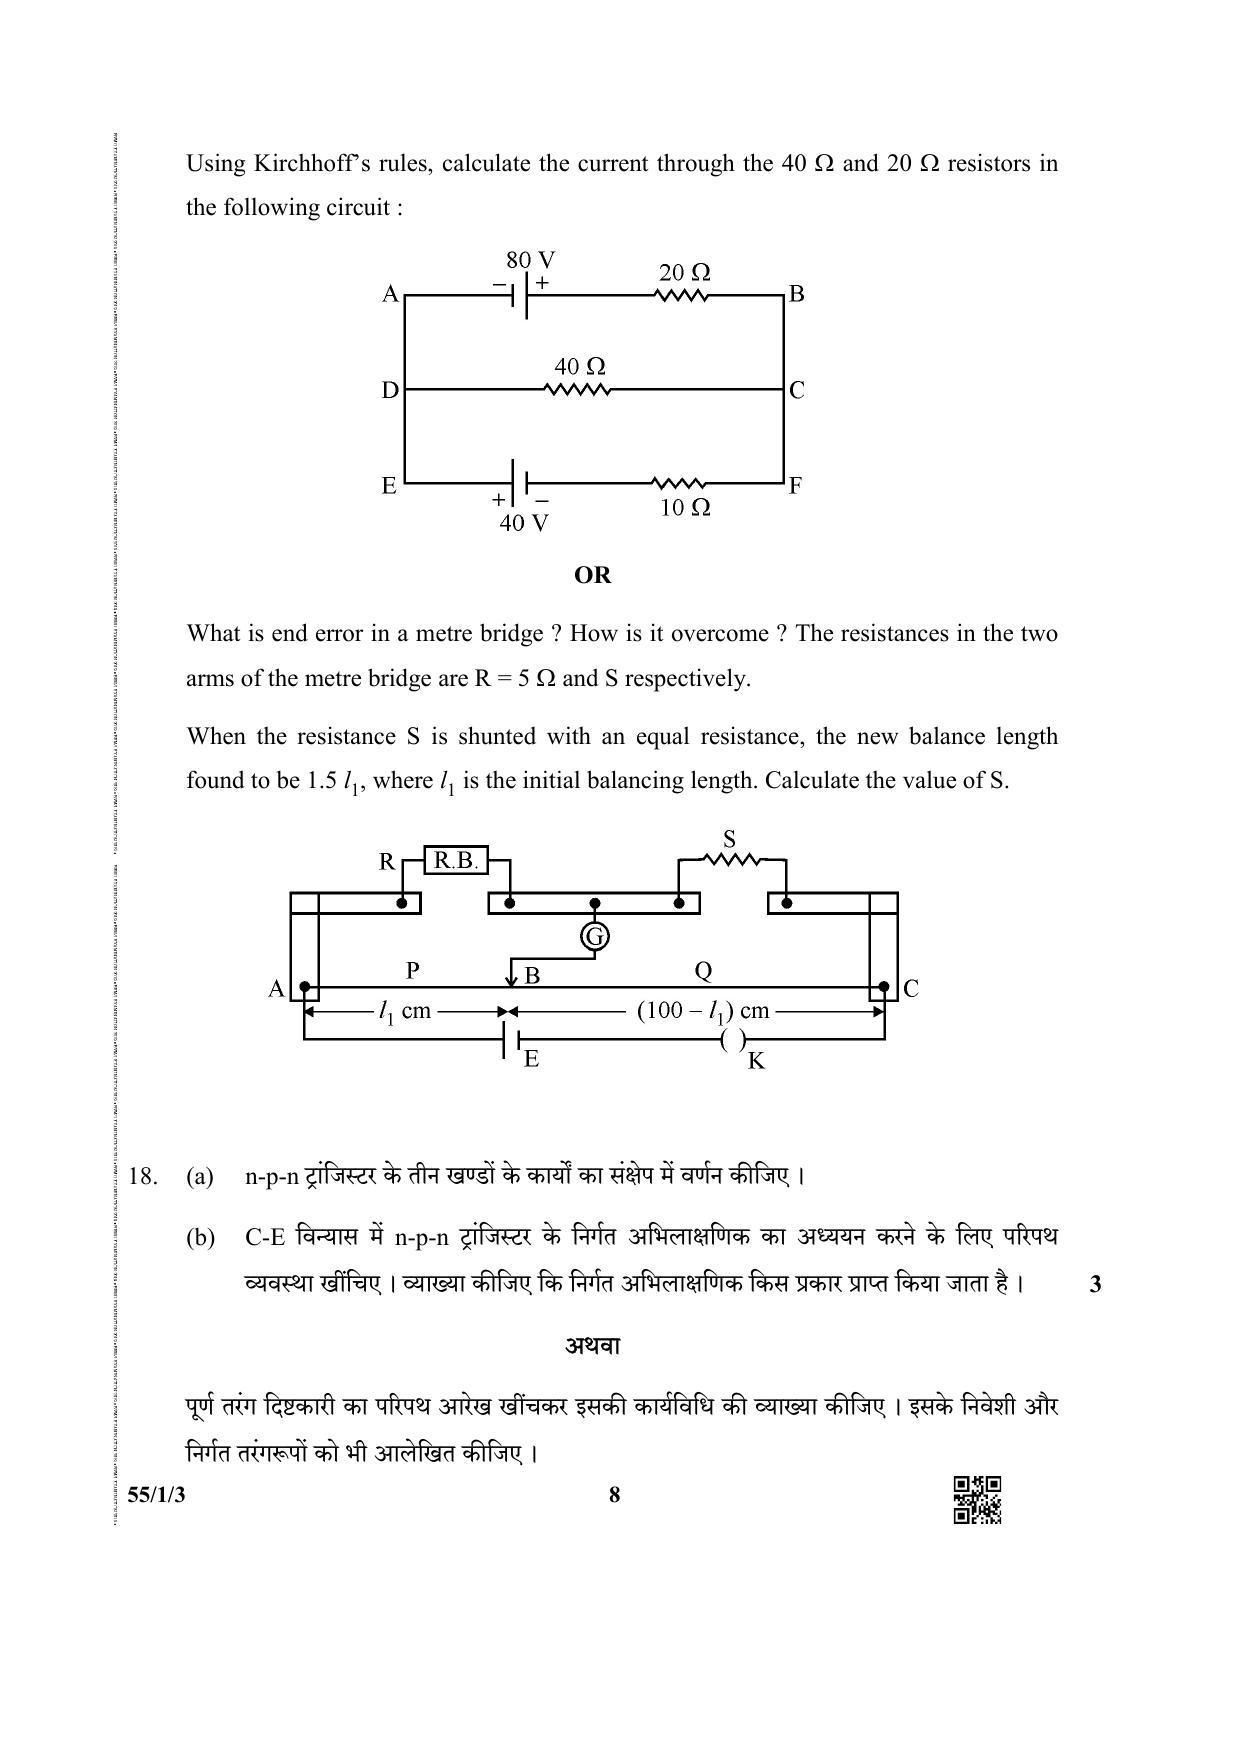 CBSE Class 12 55-1-3 (Physics) 2019 Question Paper - Page 8